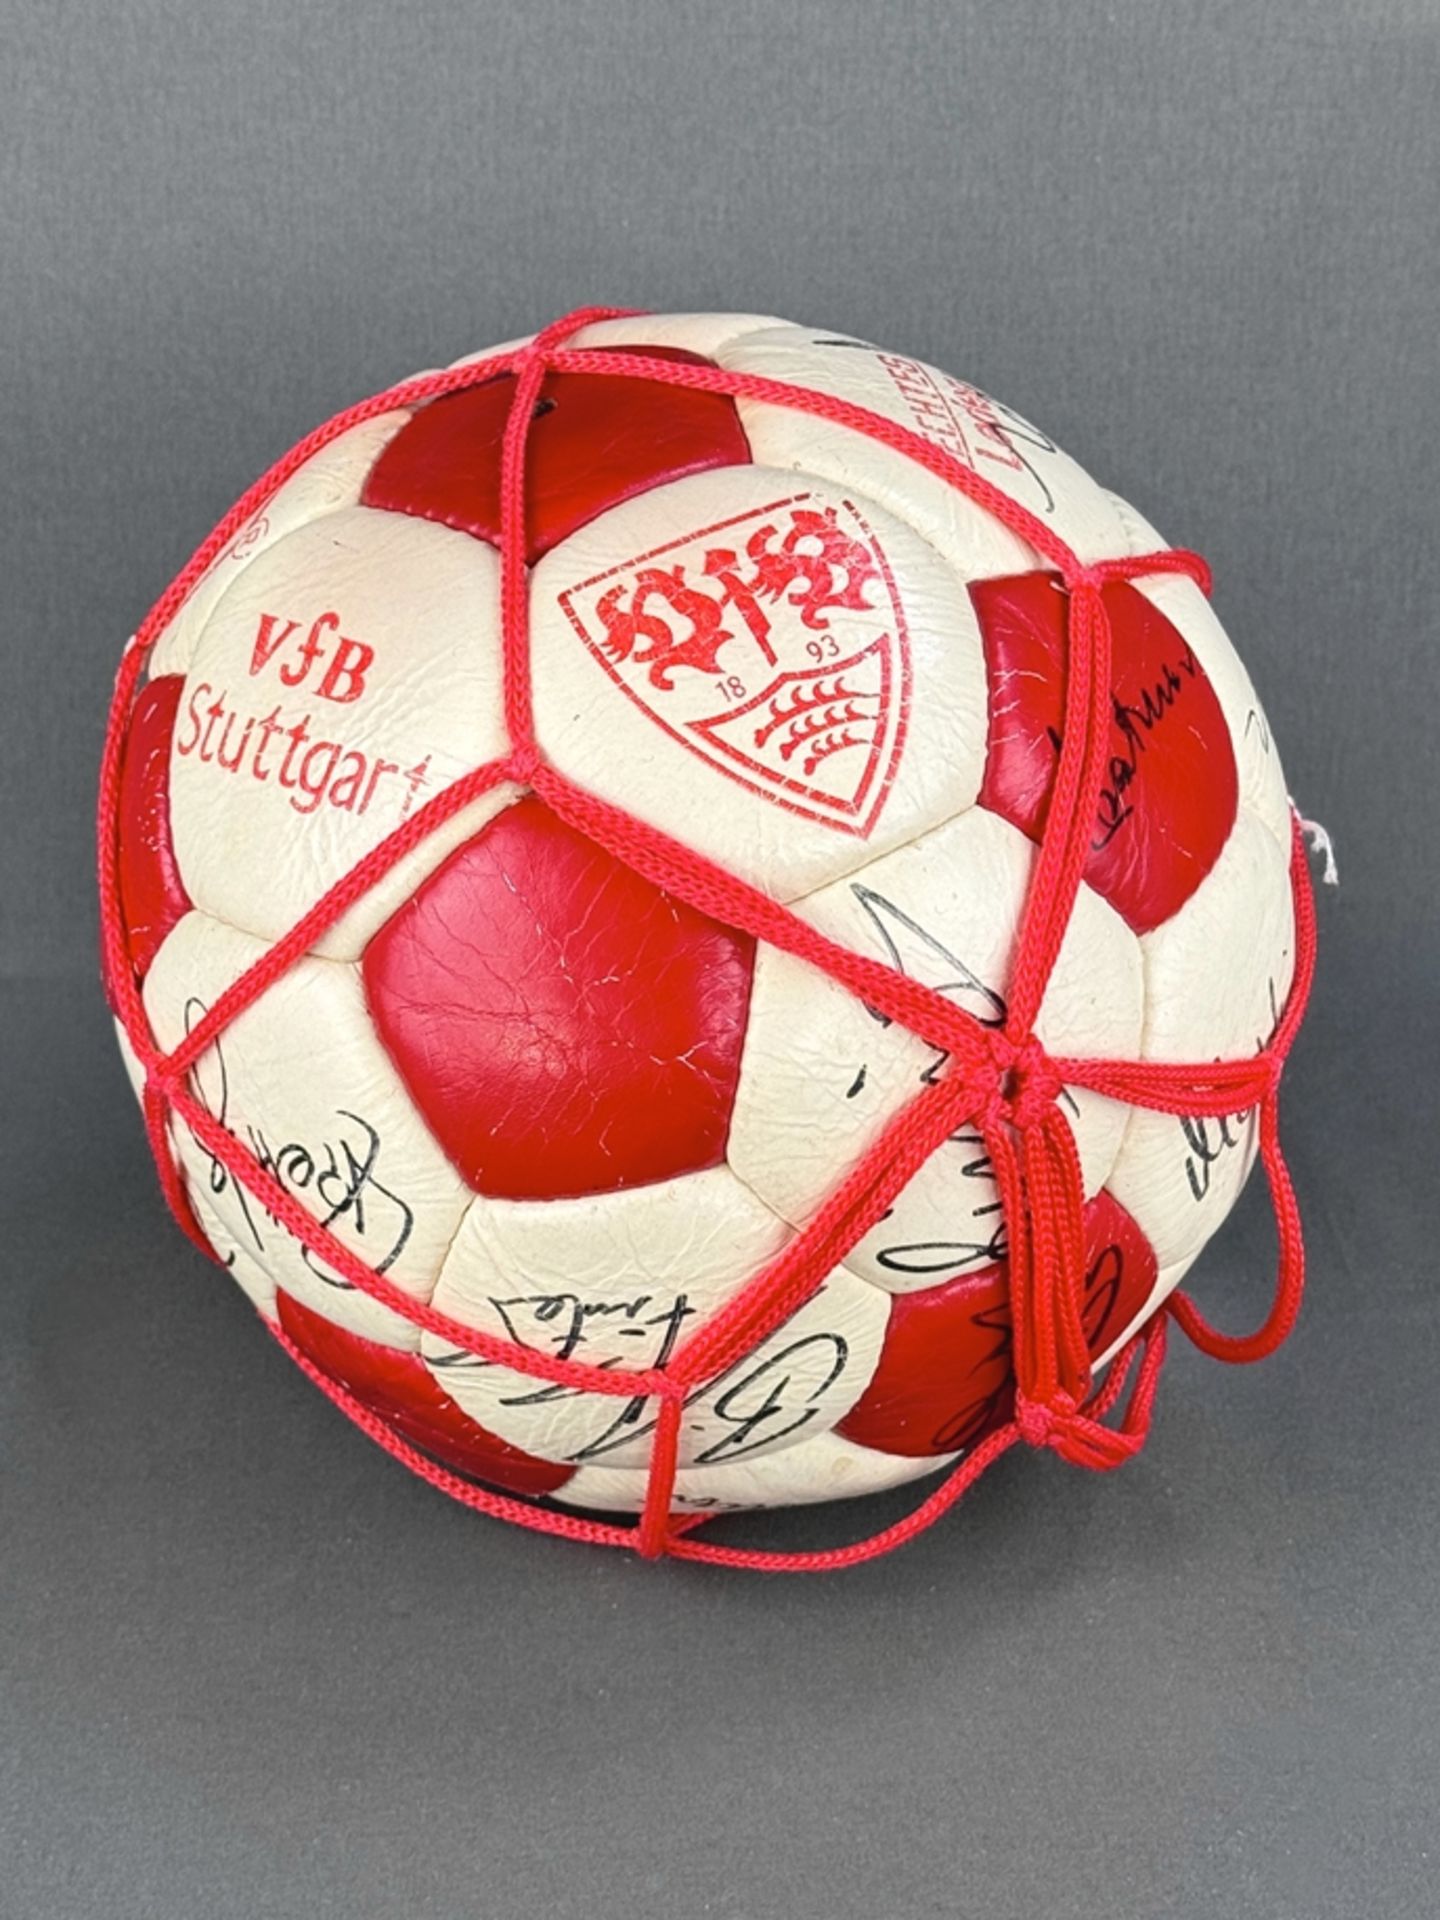 Signed football, VFB Stuttgart, autograph signatures of the squad for the 1981/82 season, with auto